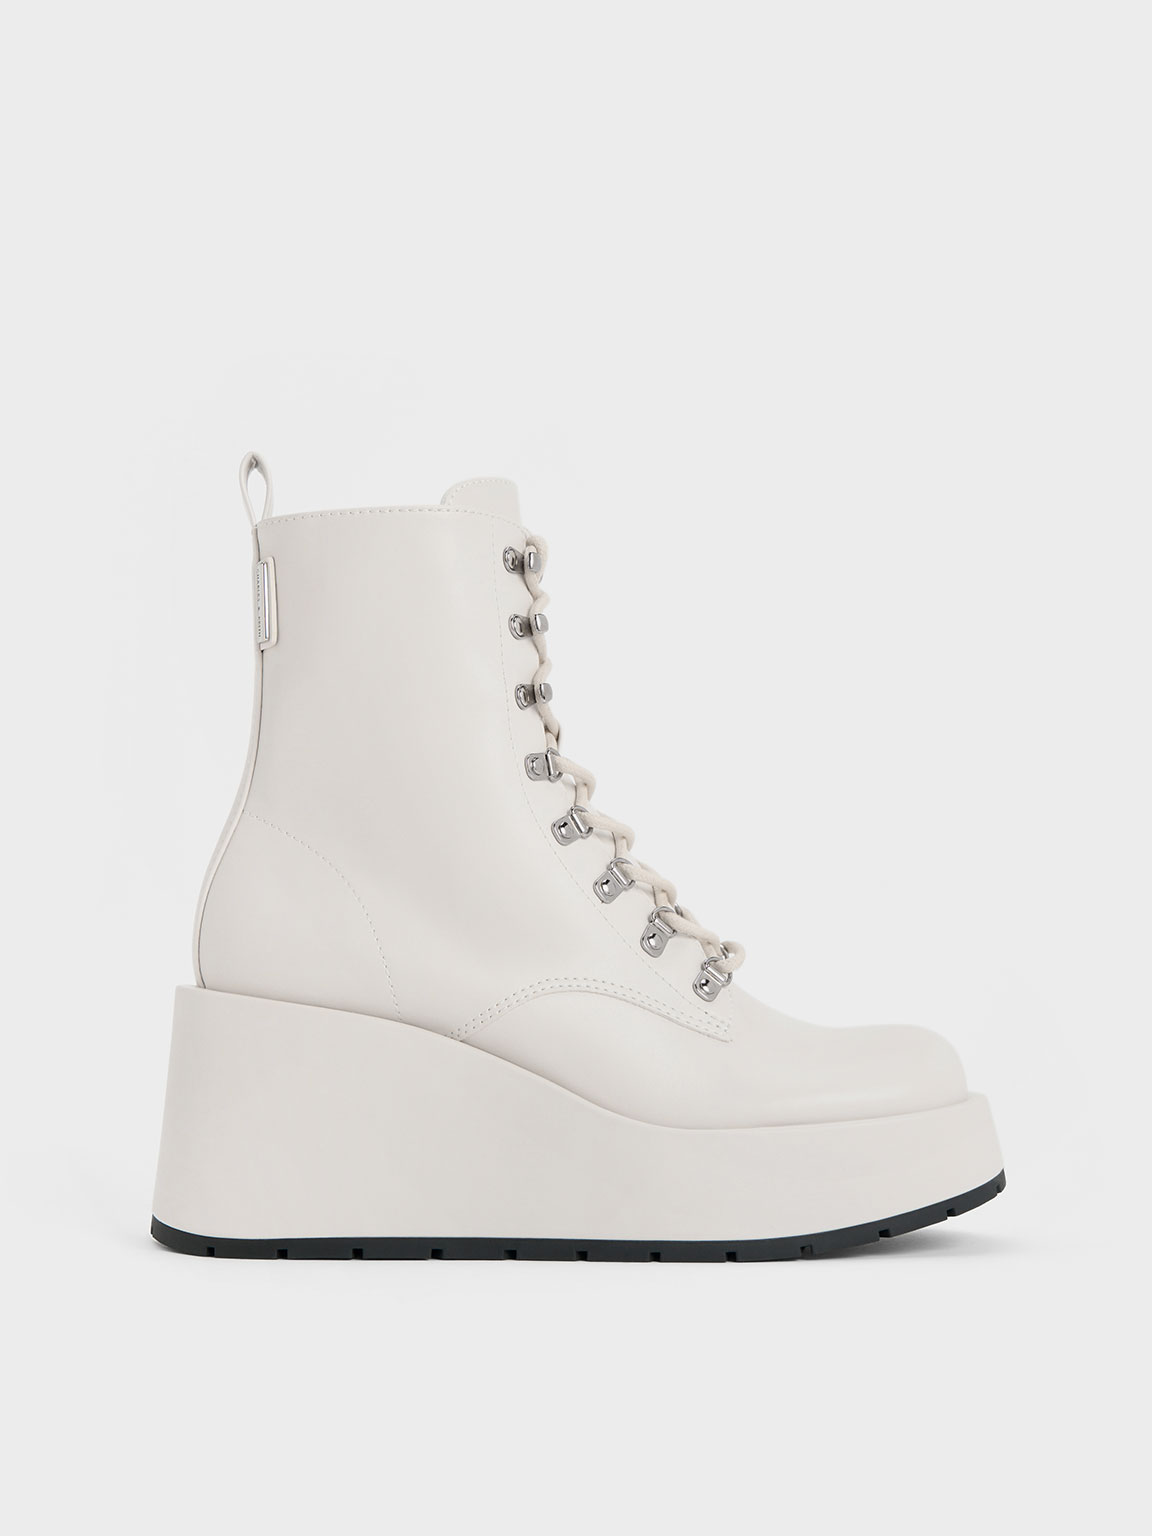 White Lace-Up Platform Wedge Ankle Boots - CHARLES & KEITH SG